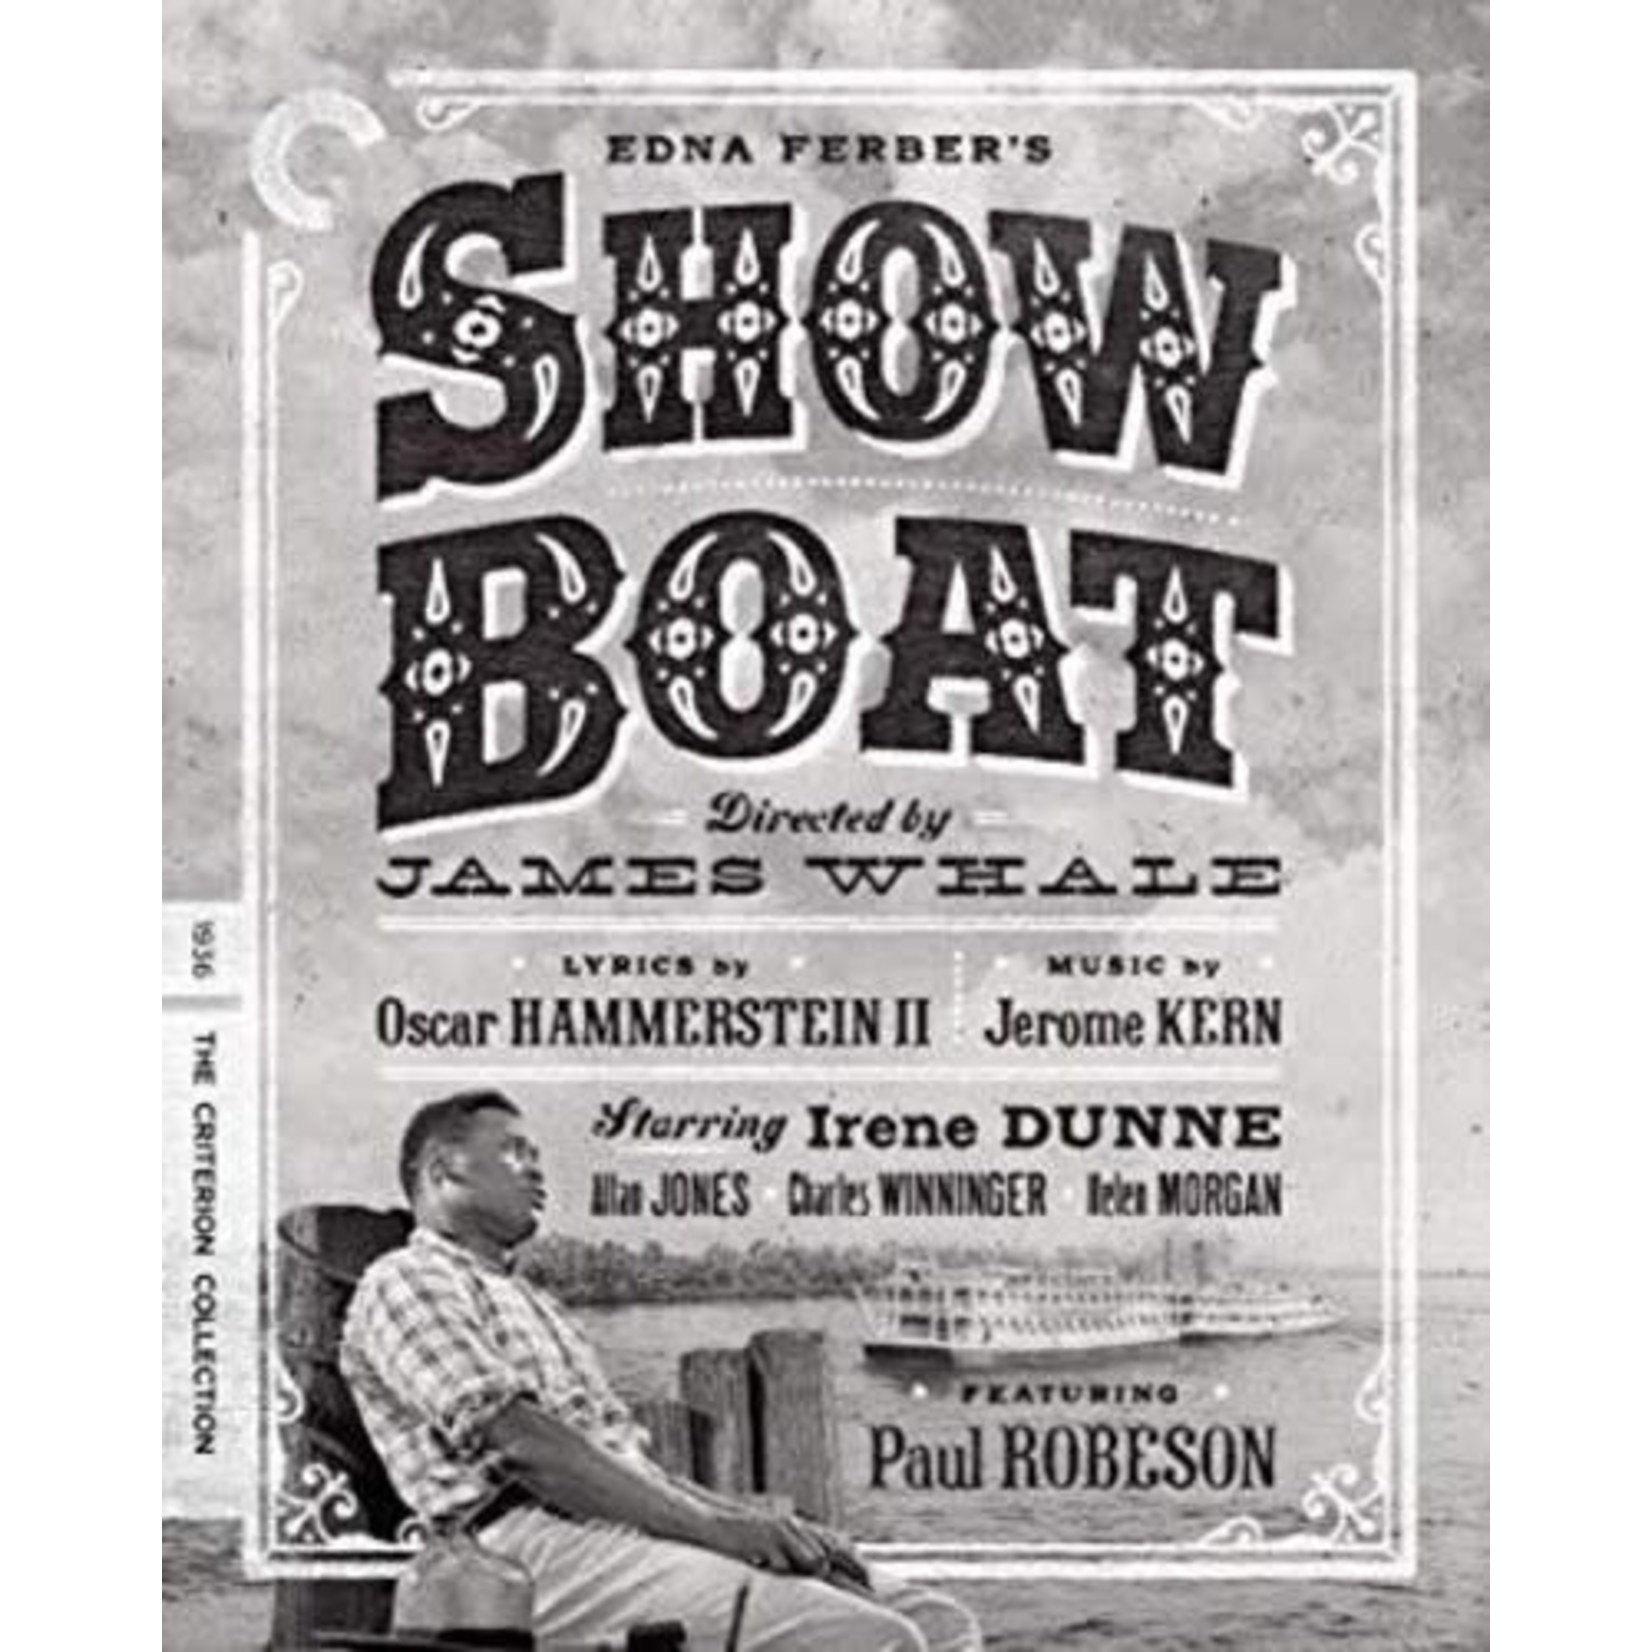 Criterion Collection Show Boat (BD)